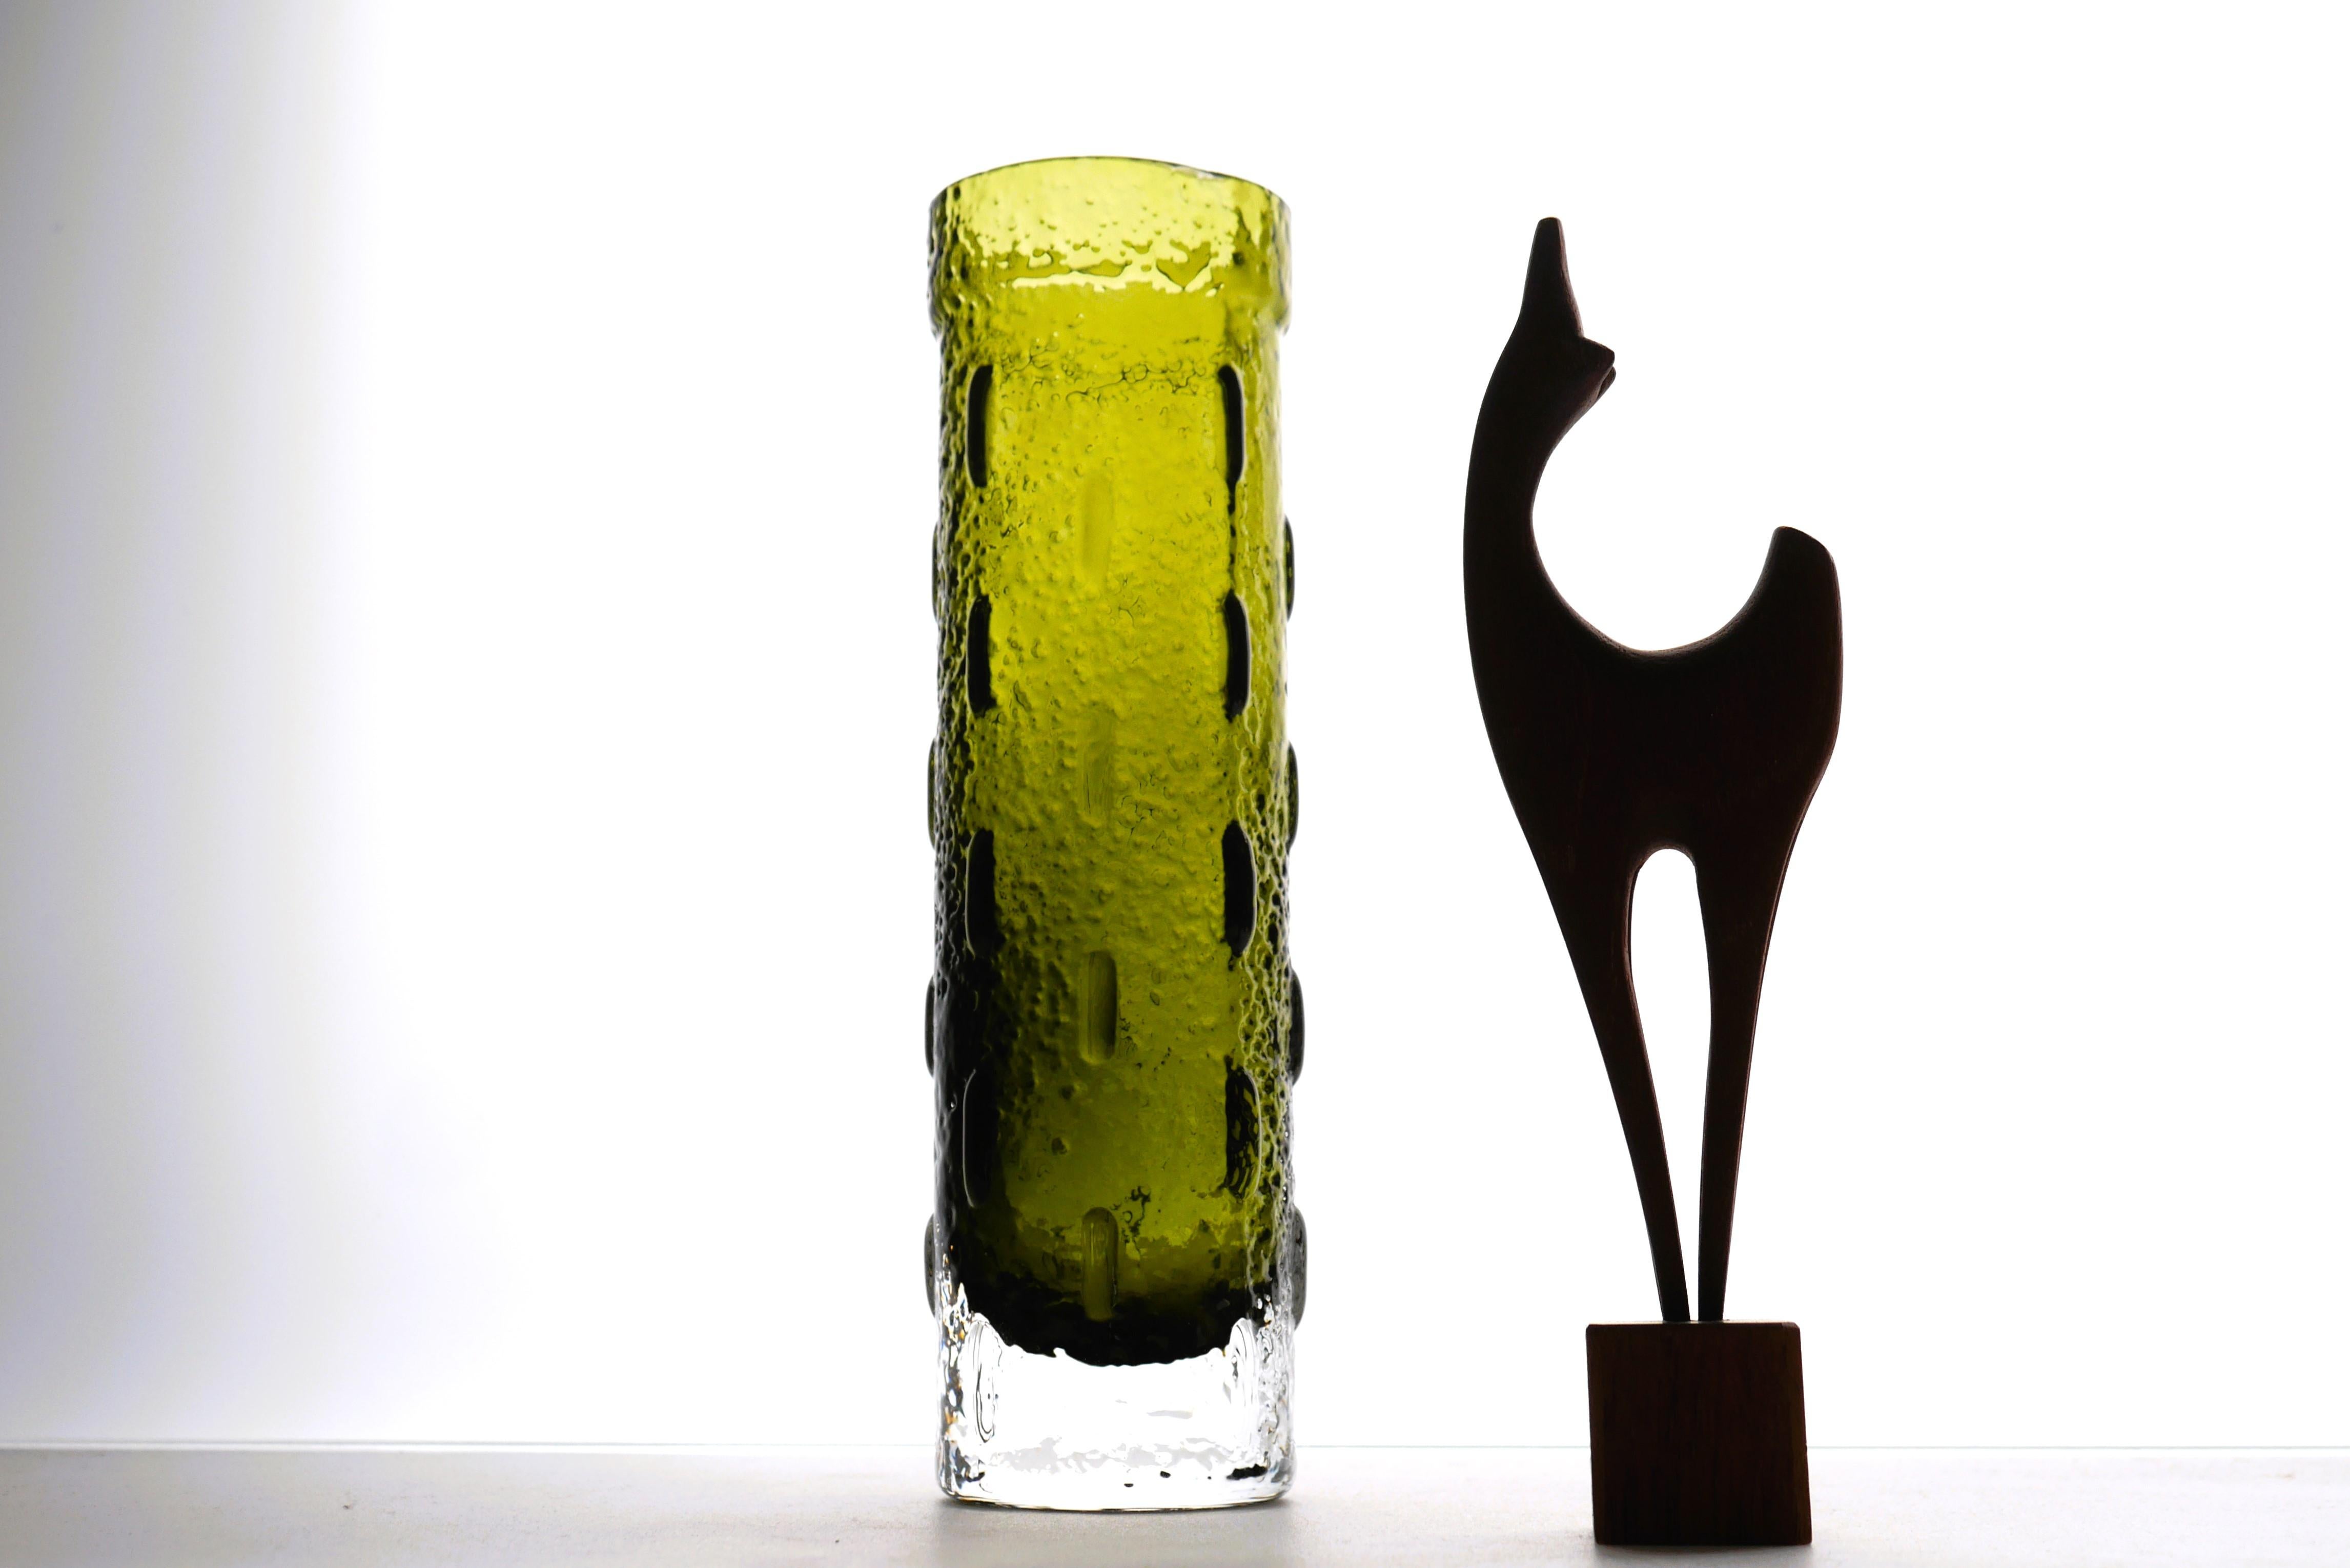 A typically piece of glass art by the talented Tamara Aladin for Riihimäan lasi, Finland. It has a fantastic deep moss green colour and as many of her vases it has a brutalist and modernistic style. This piece has been attributed in several archival